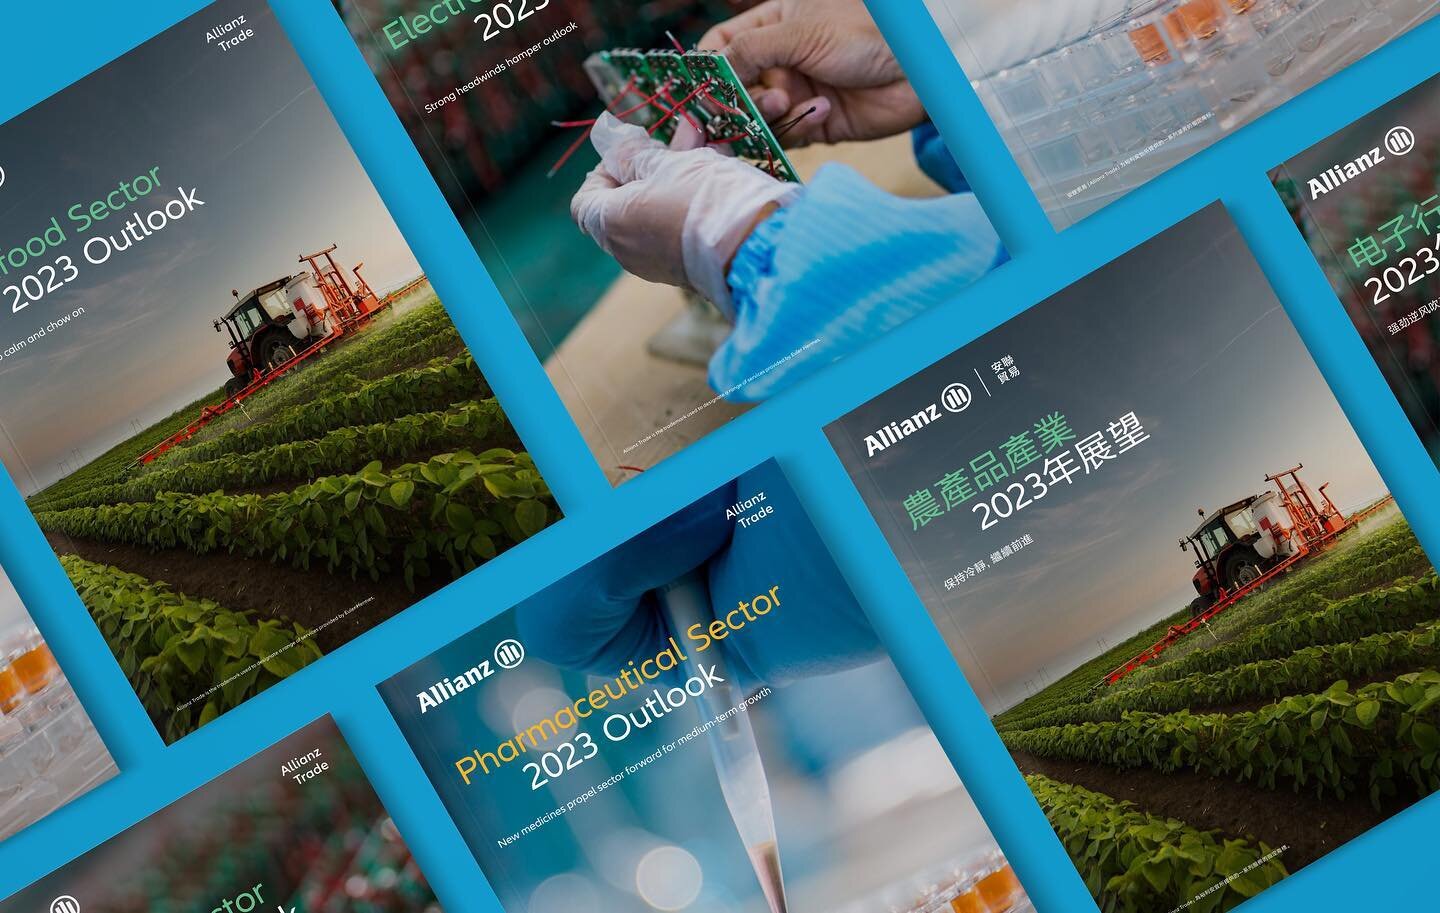 Allianz Trade published a series of industry outlook reports through 2023 covering three different sectors. Studio Giraffe designed each report, as well as digital collateral promoting them. We also localised the reports and collateral in Simplified 